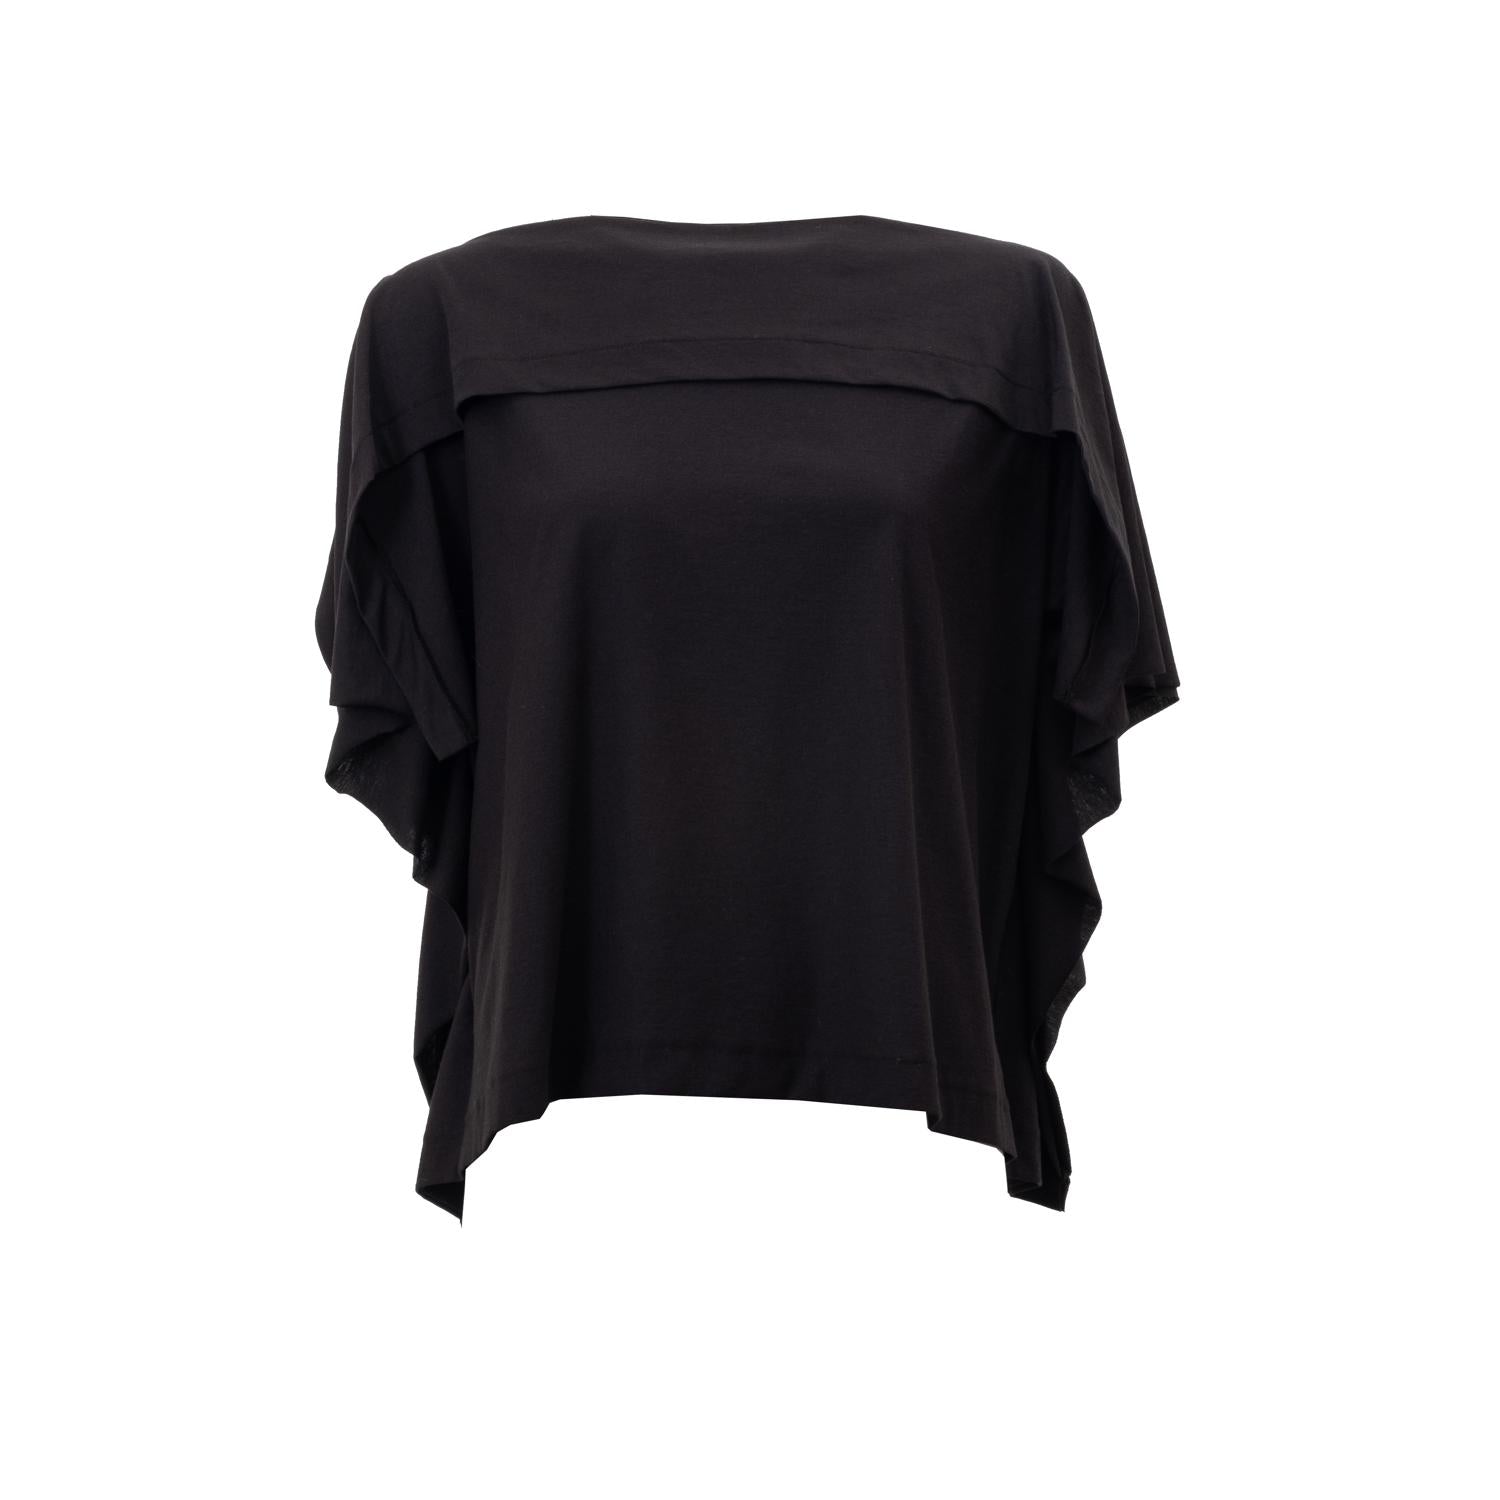 Flowing jersey top in black made from organic cotton